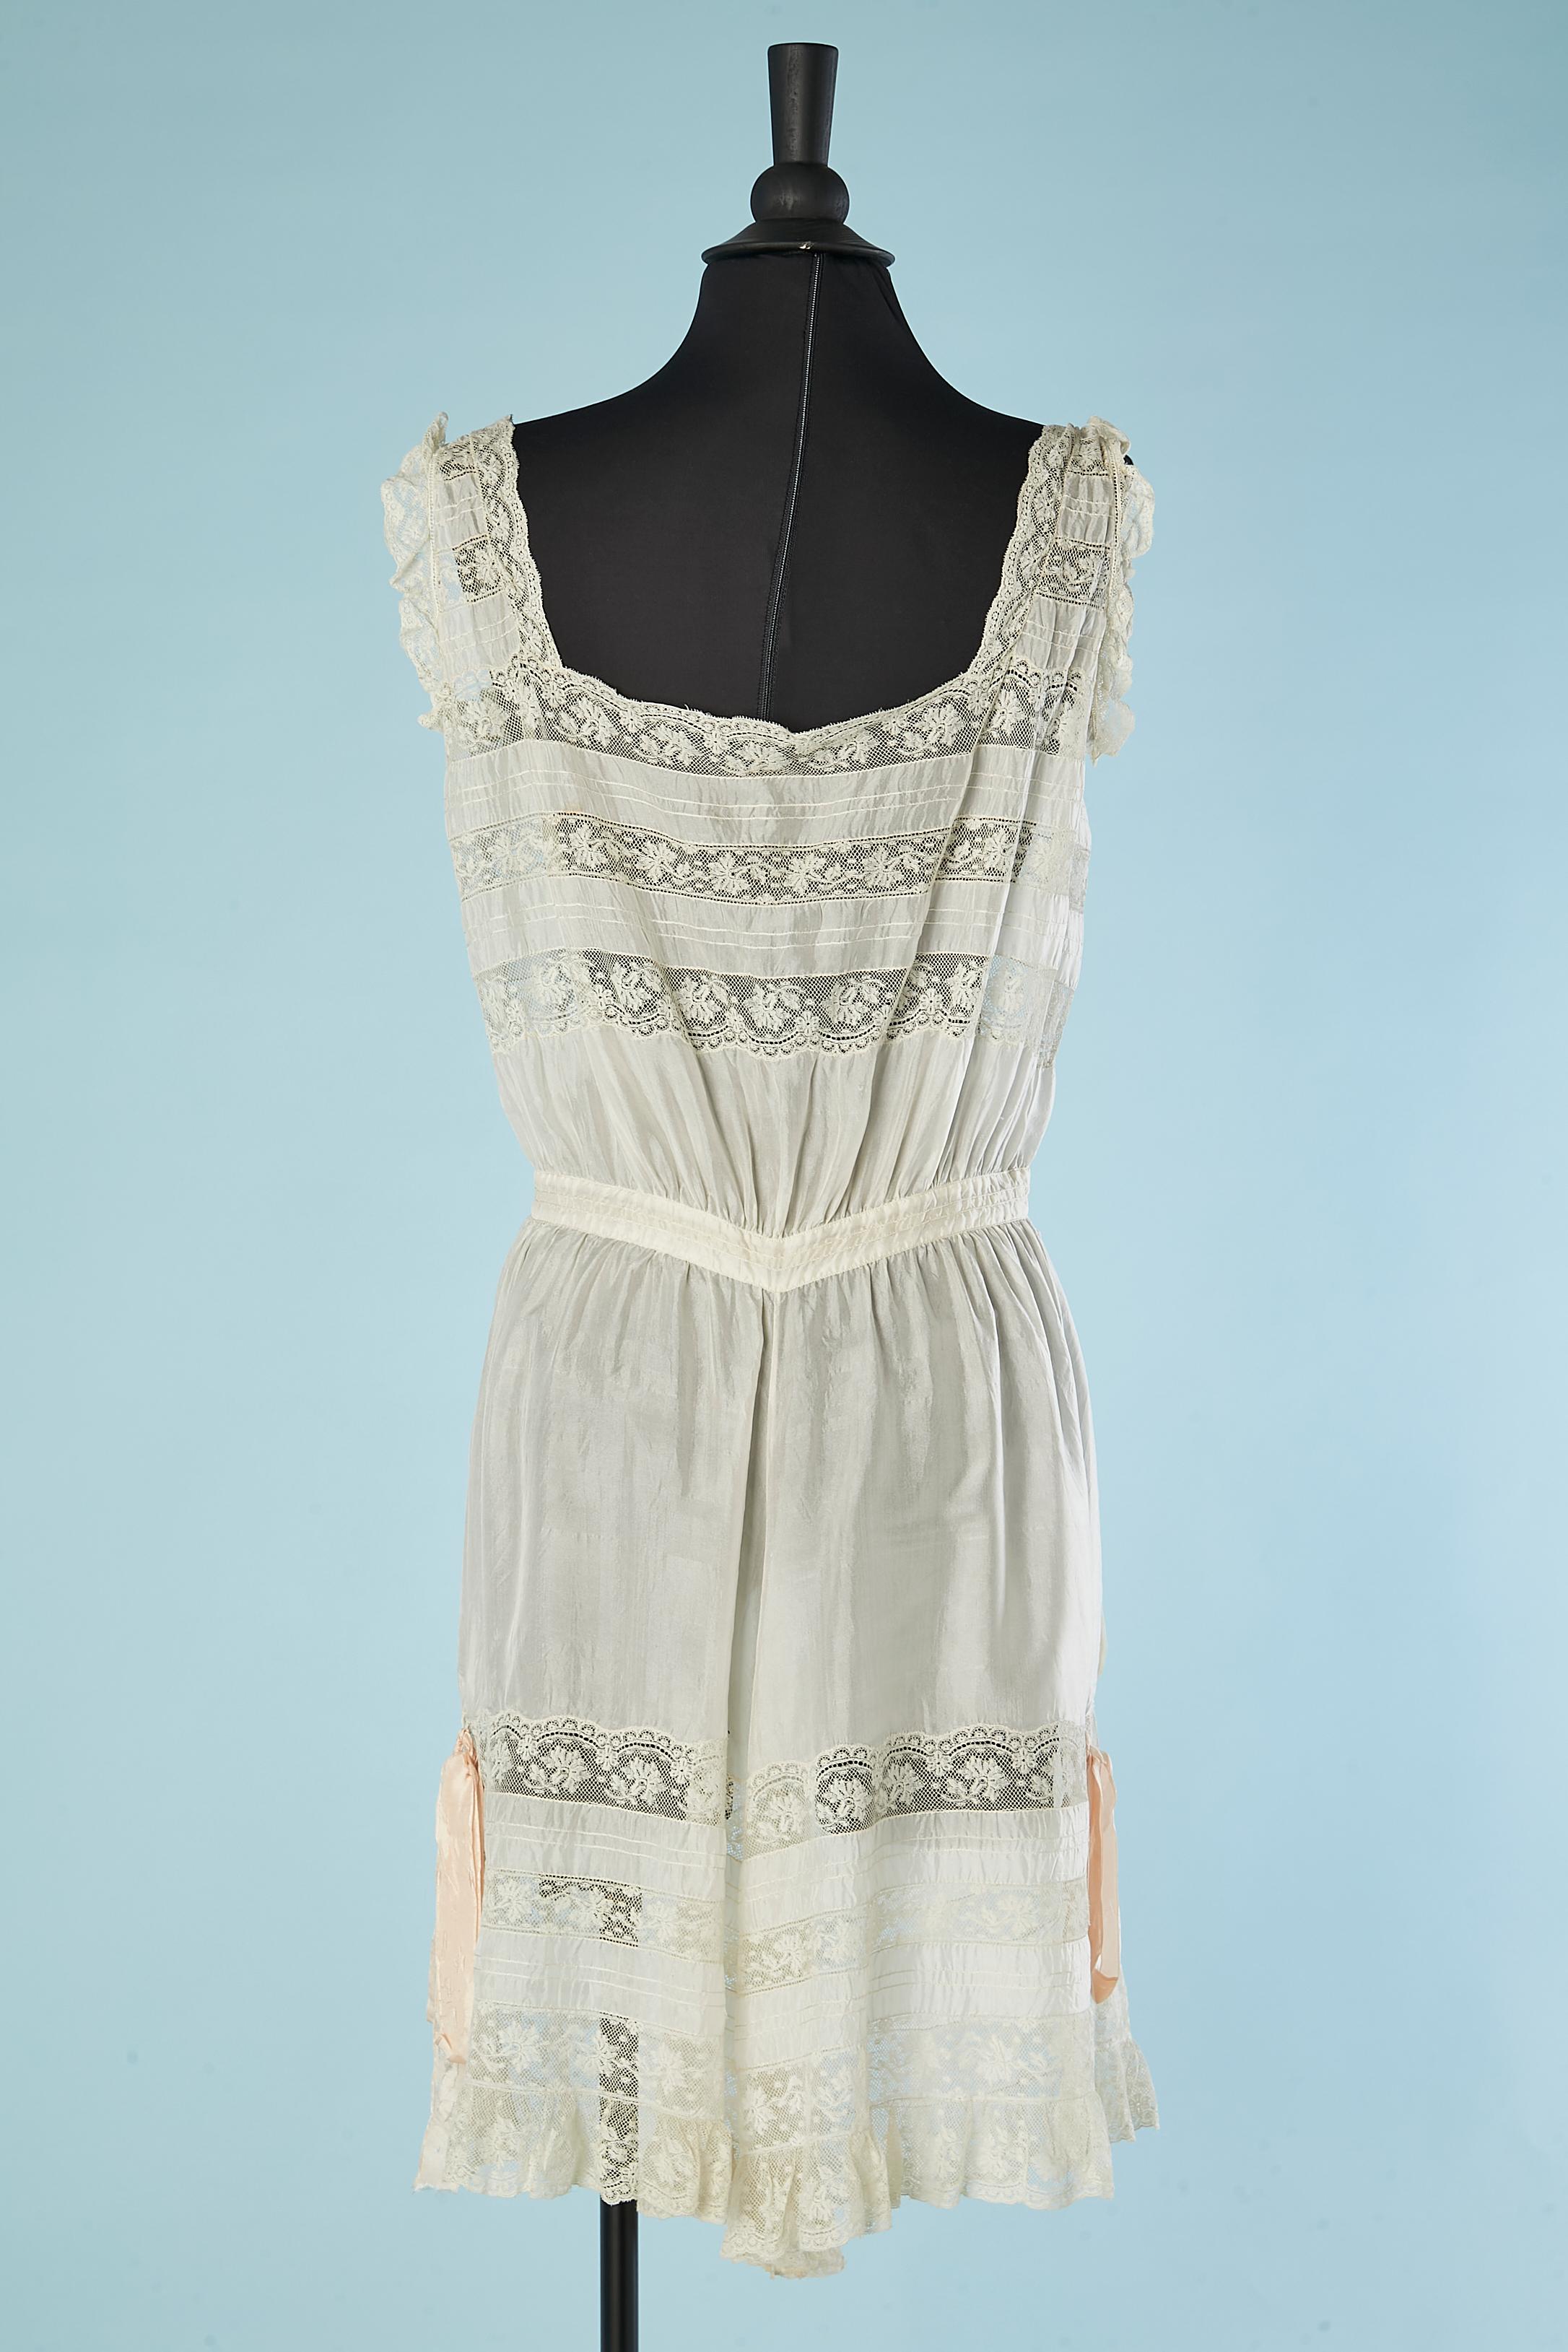 Silk and lace lingerie romper with buttons in the middle front Circa 1900's  2